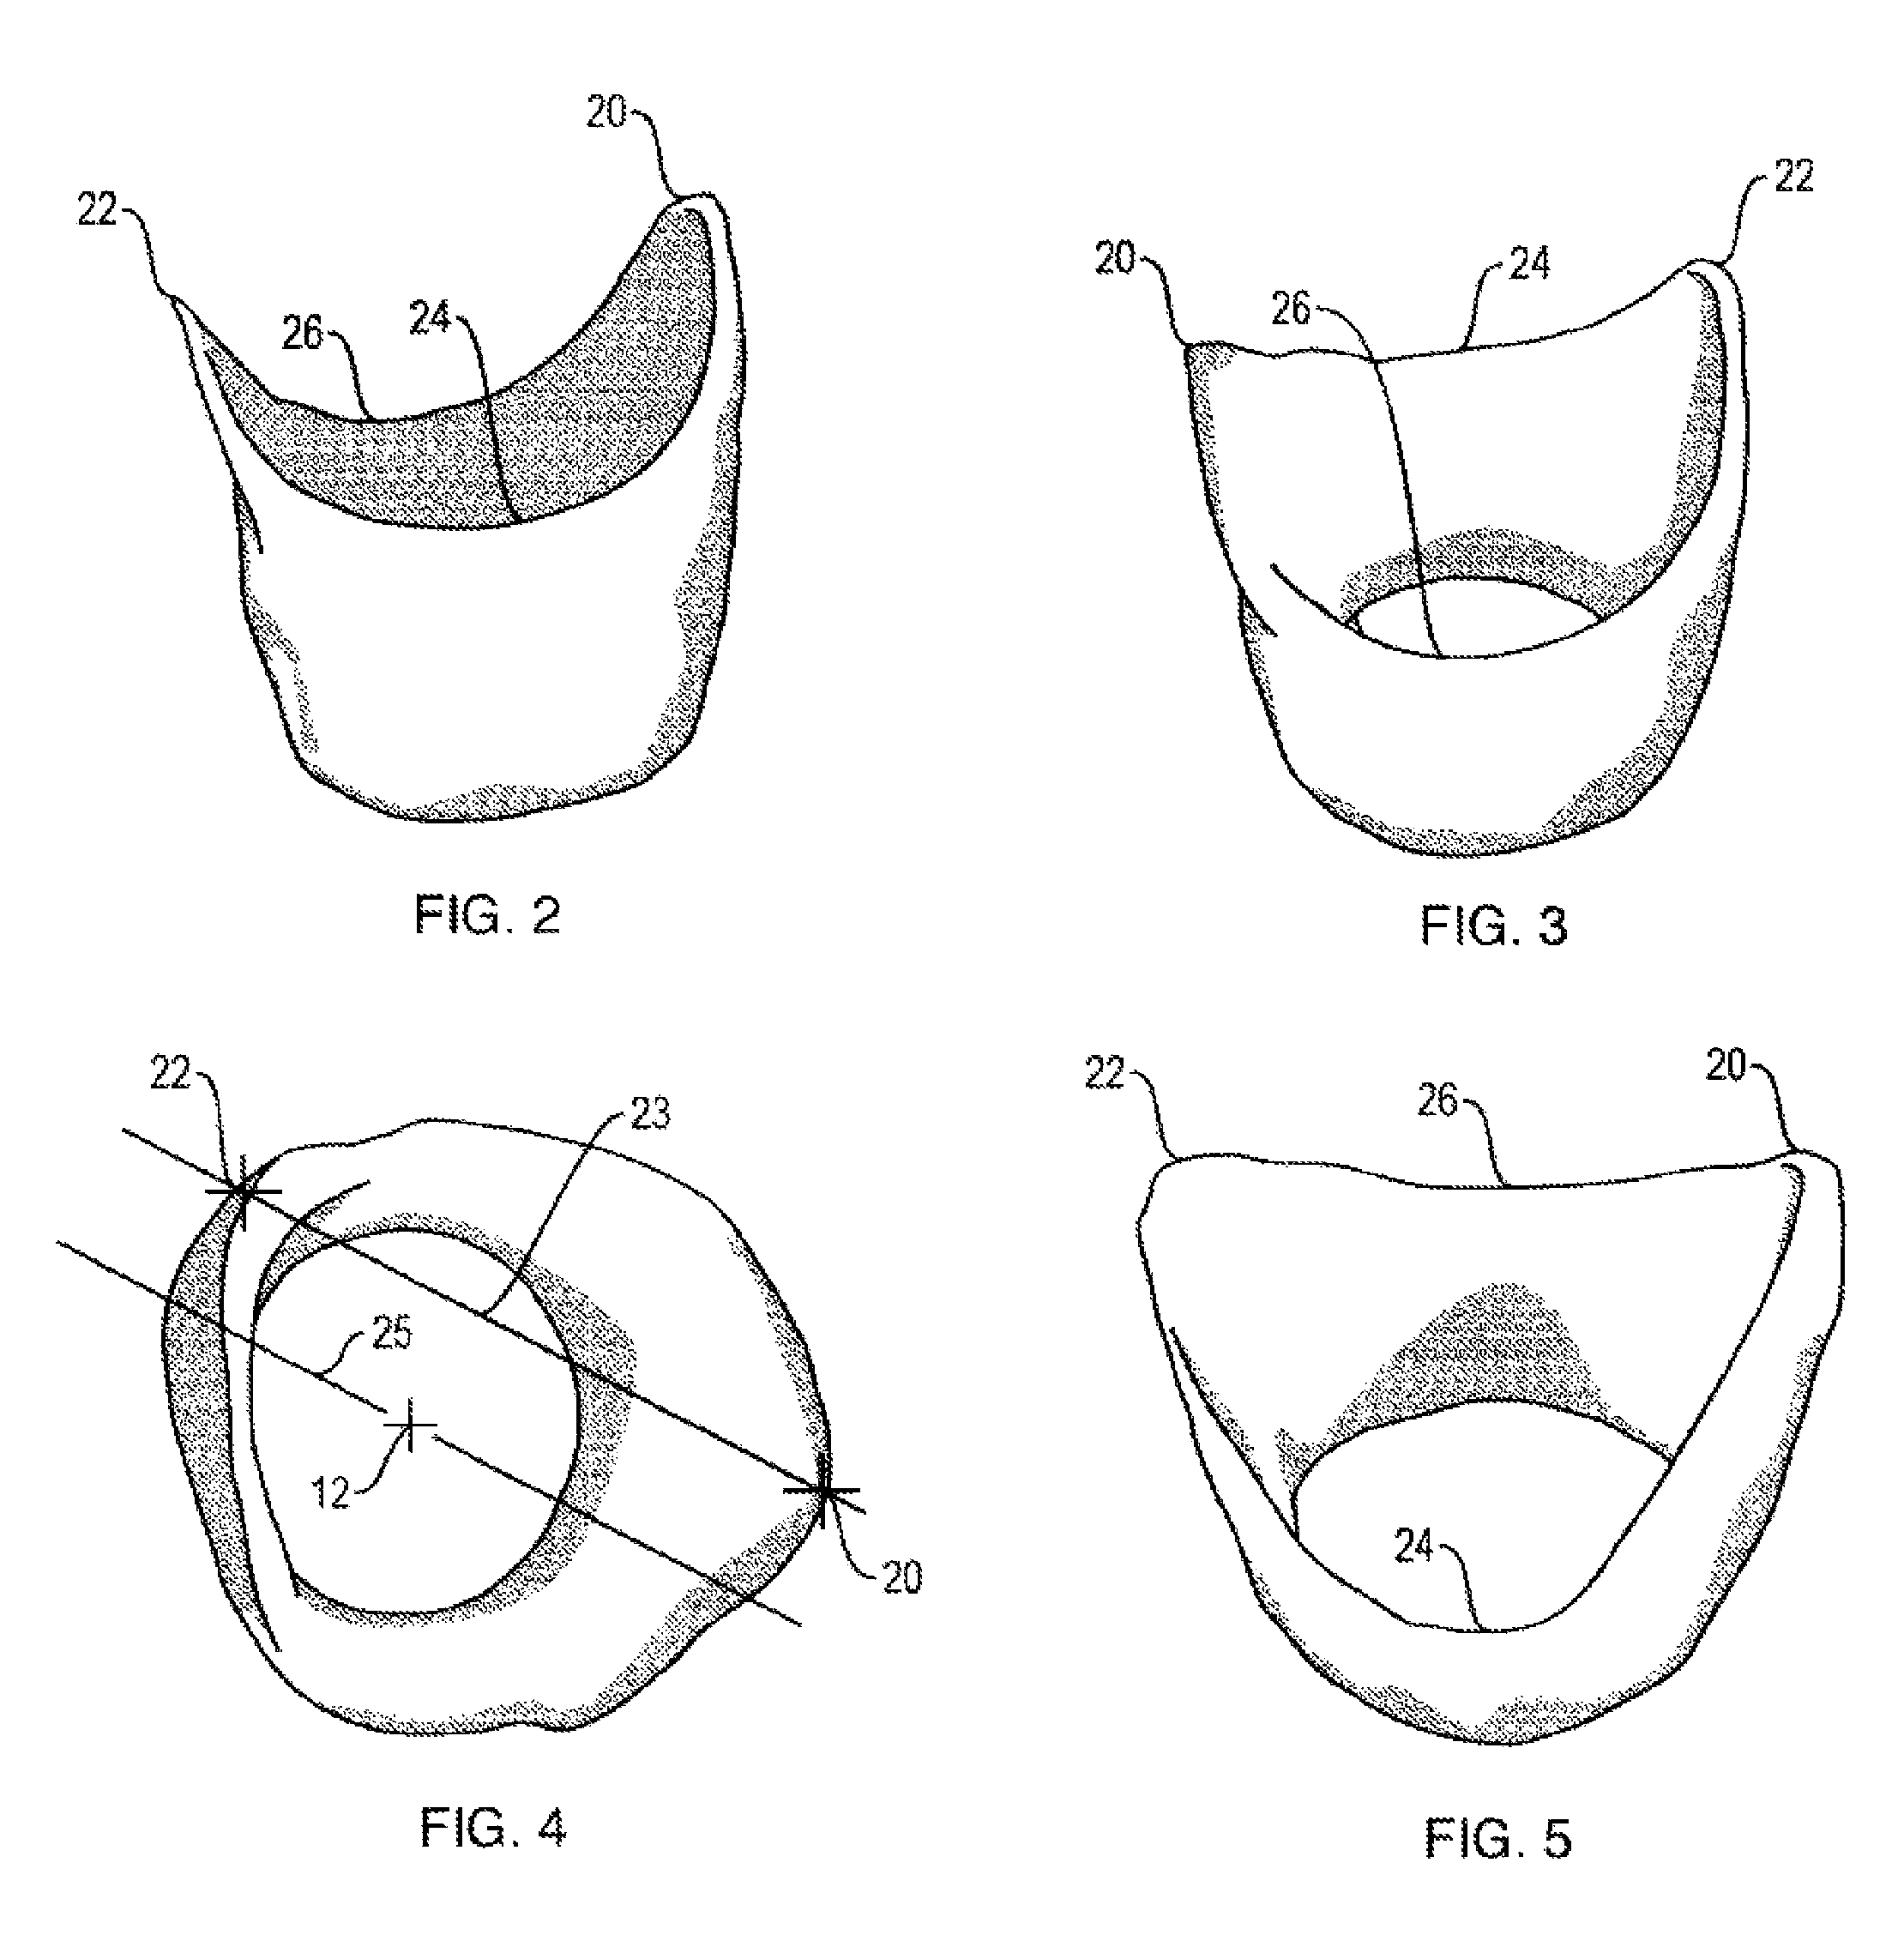 Method and apparatus for recording spatial gingival soft tissue relationship to implant placement within alveolar bone for immediate-implant placement